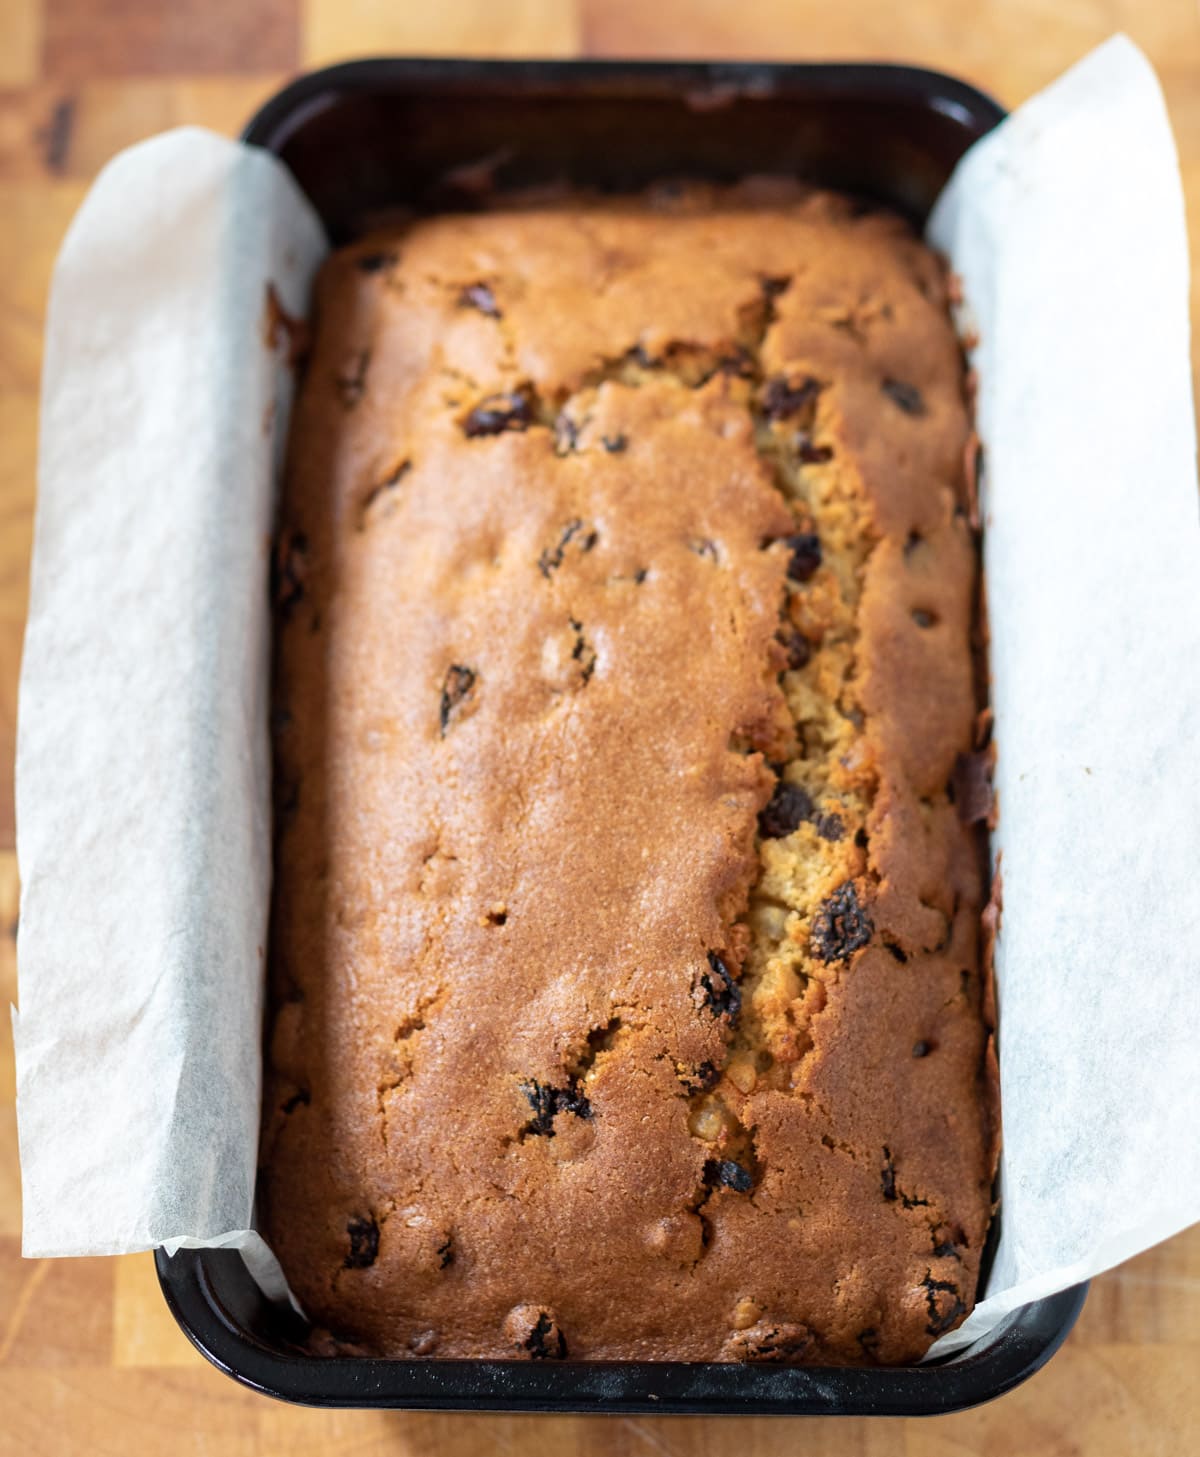 Baked easy fruit loaf cake removed from the oven.